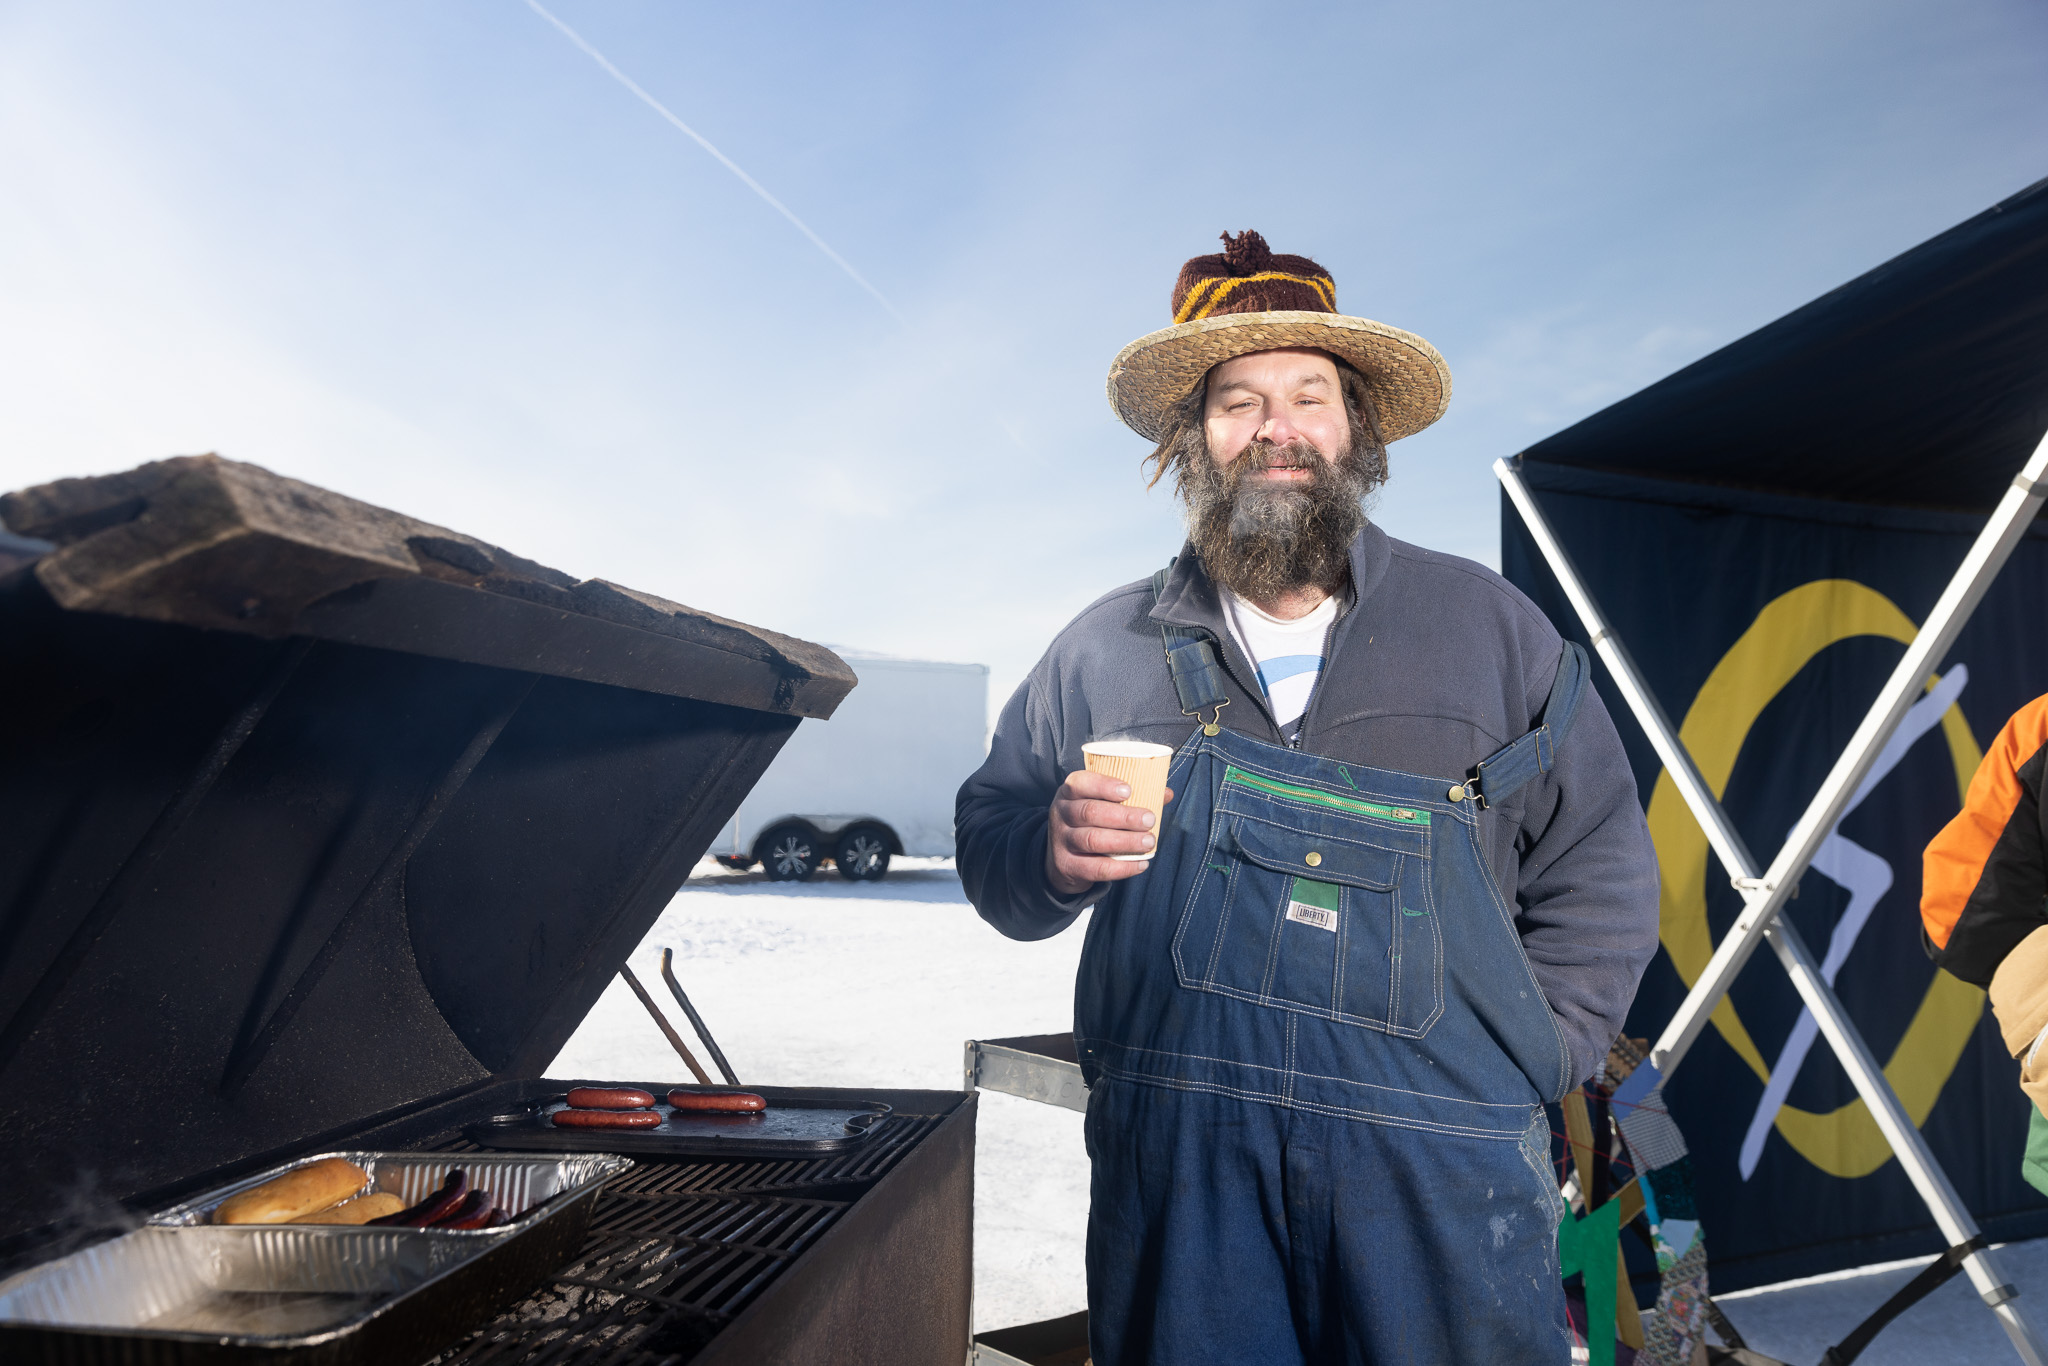 A man in overalls grills hot dogs at an ice fishing tournament.